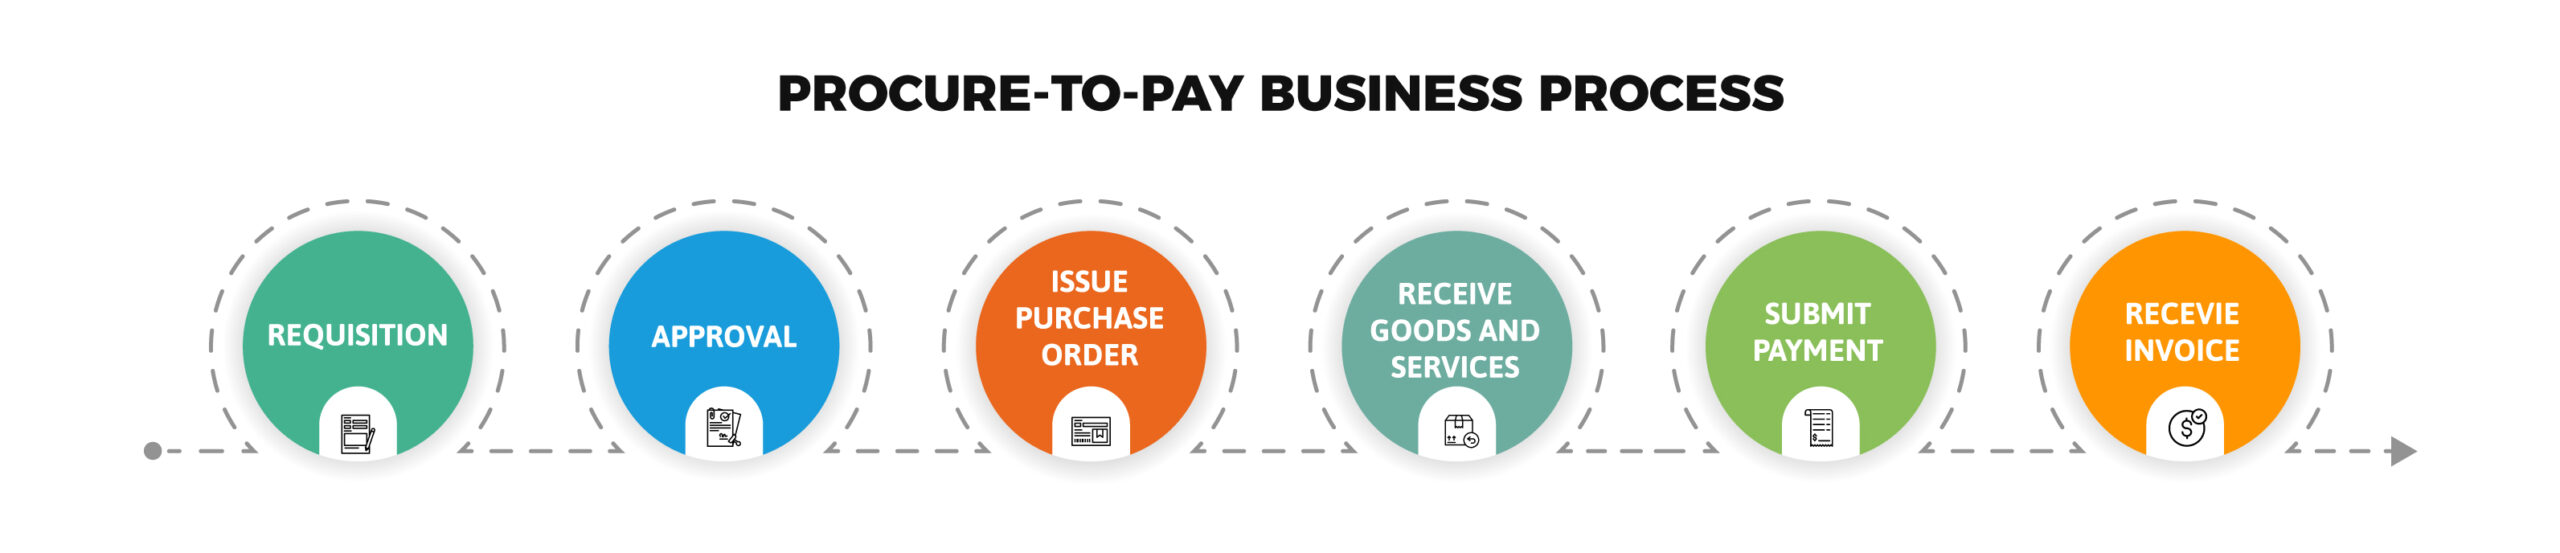 Business procure to pay process